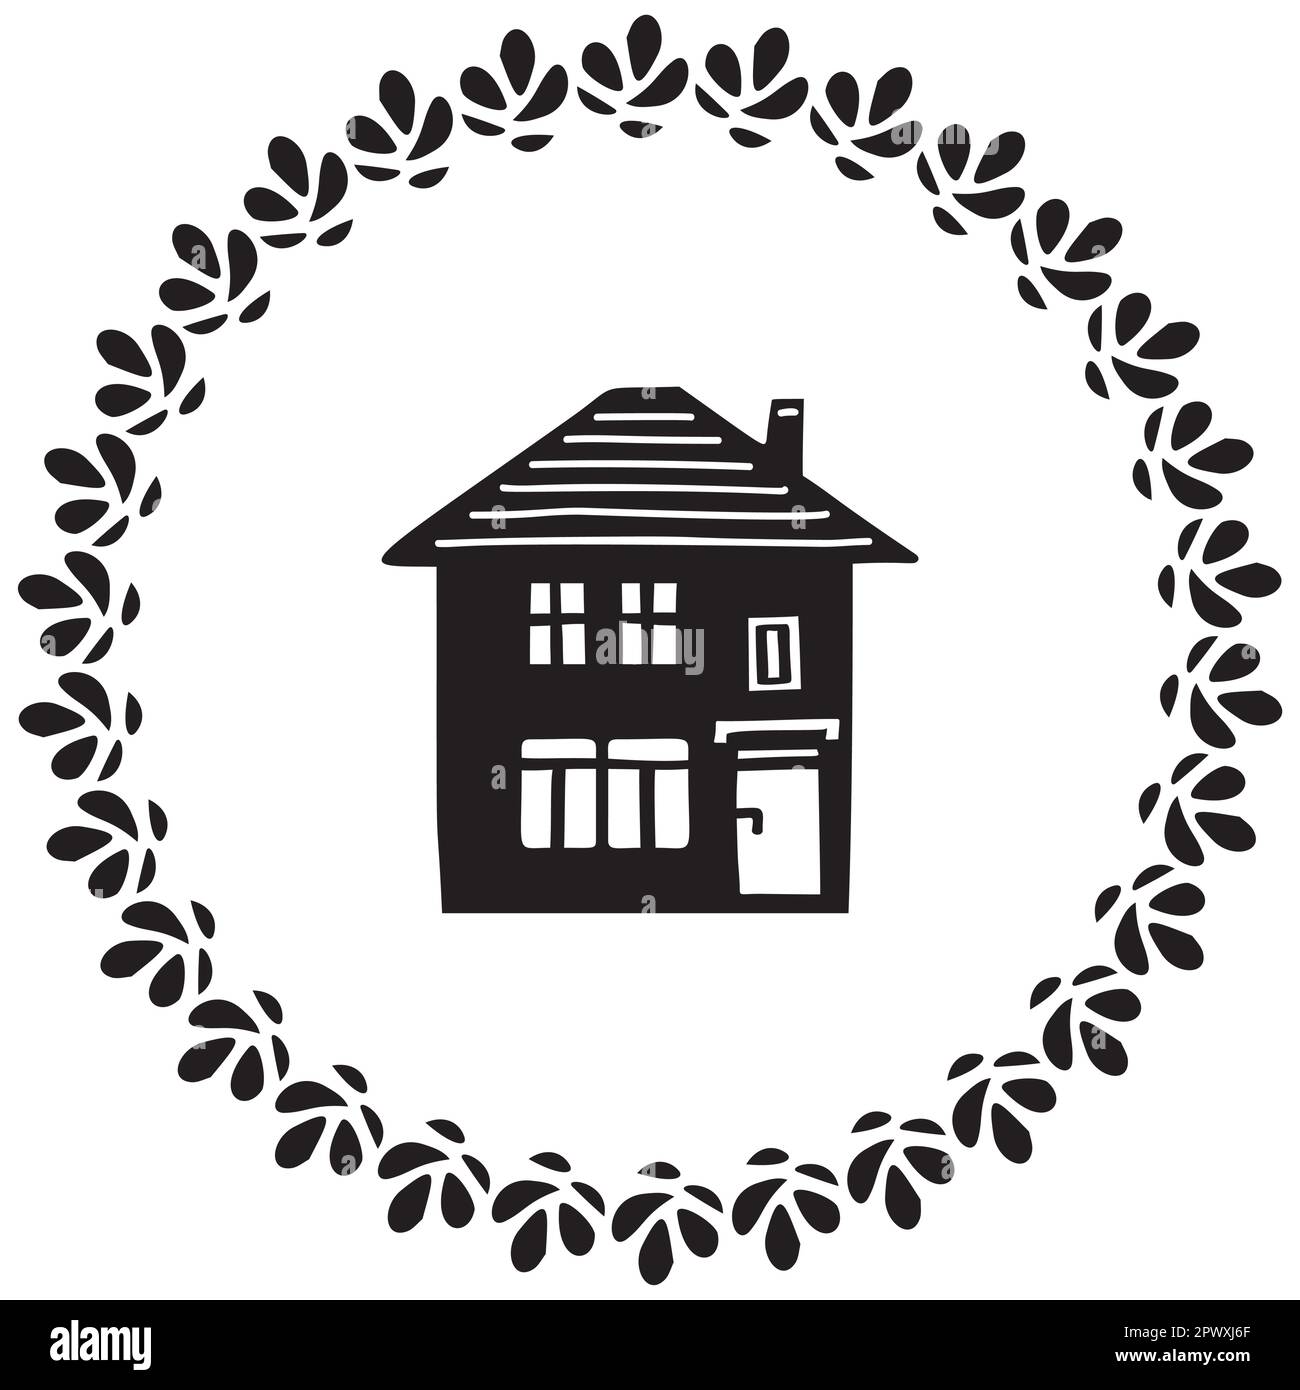 Cute rustic cottage motif in vintage style frame. Vector illustration of whimsical rural country house.  Stock Vector